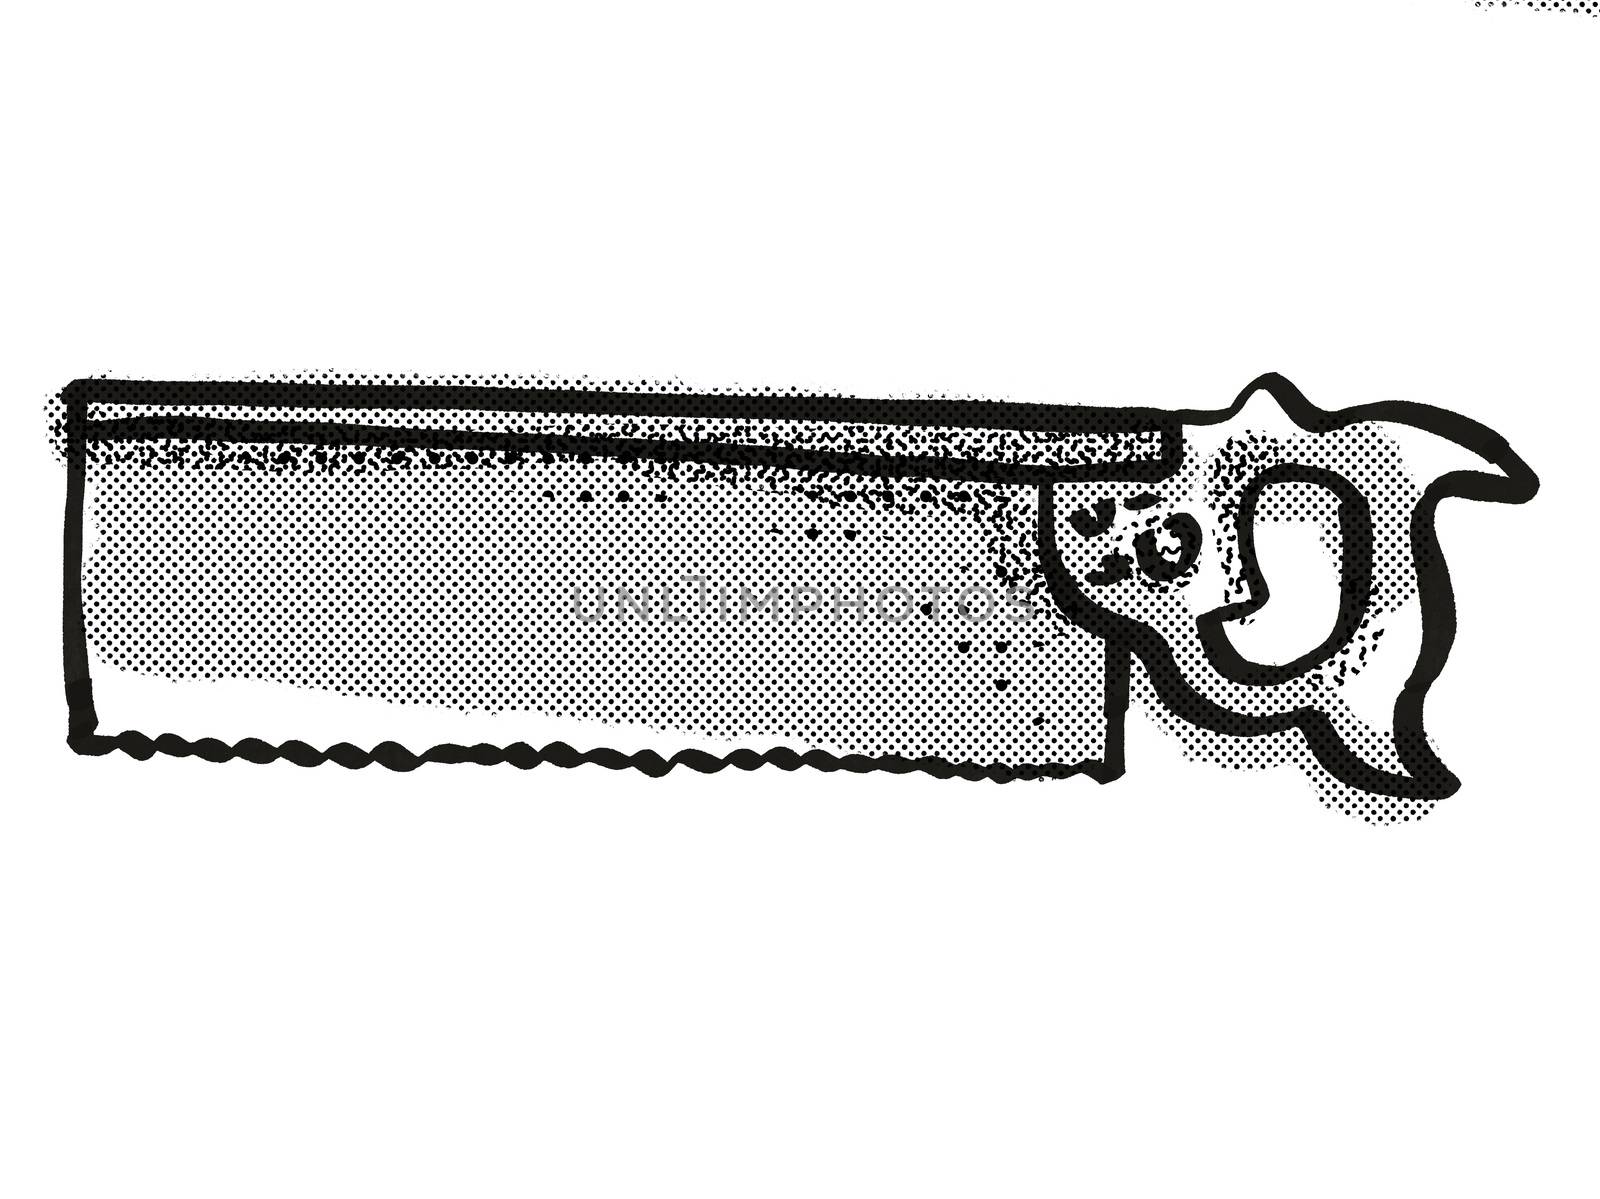 Retro cartoon style drawing of a tenon saw , a woodworking hand tool  on isolated white background done in black and white